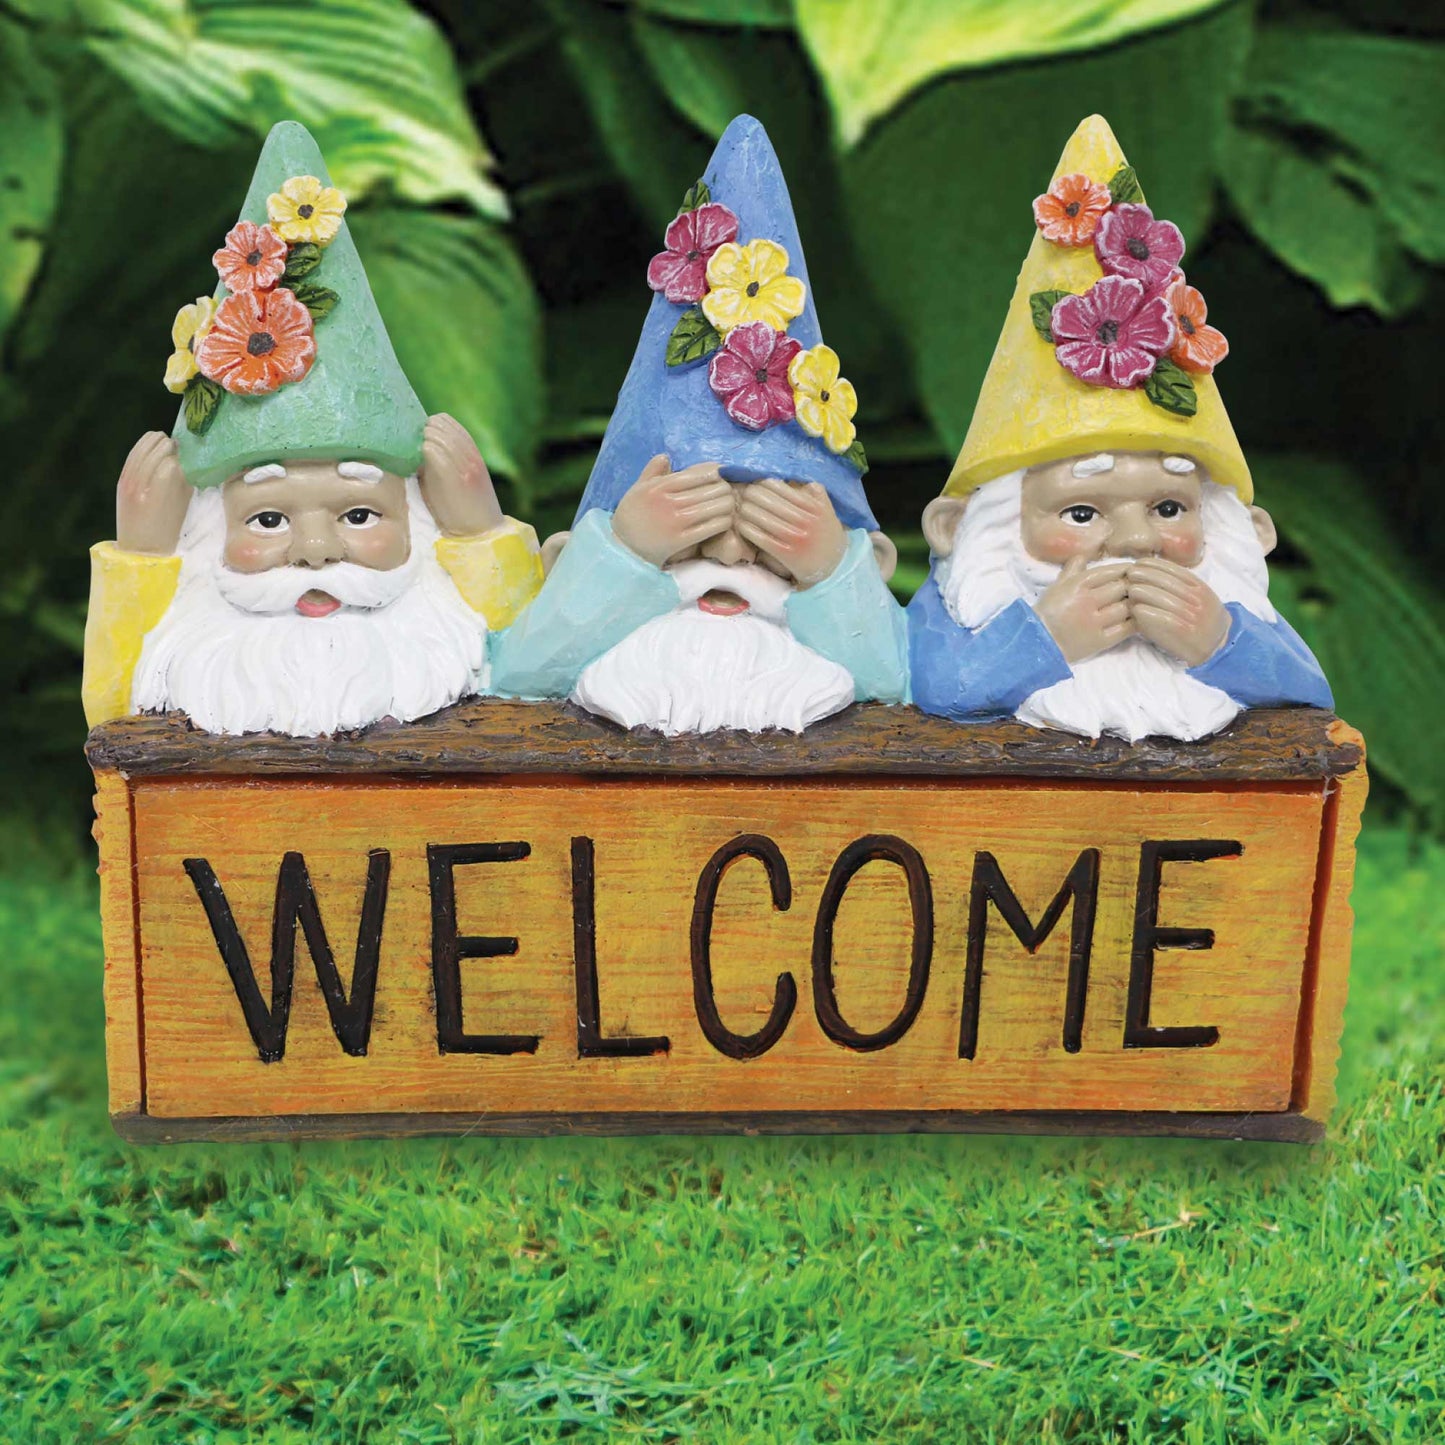 Silver & Stone Outdoor Solar Welcome Sign with Jinxie Gnomes